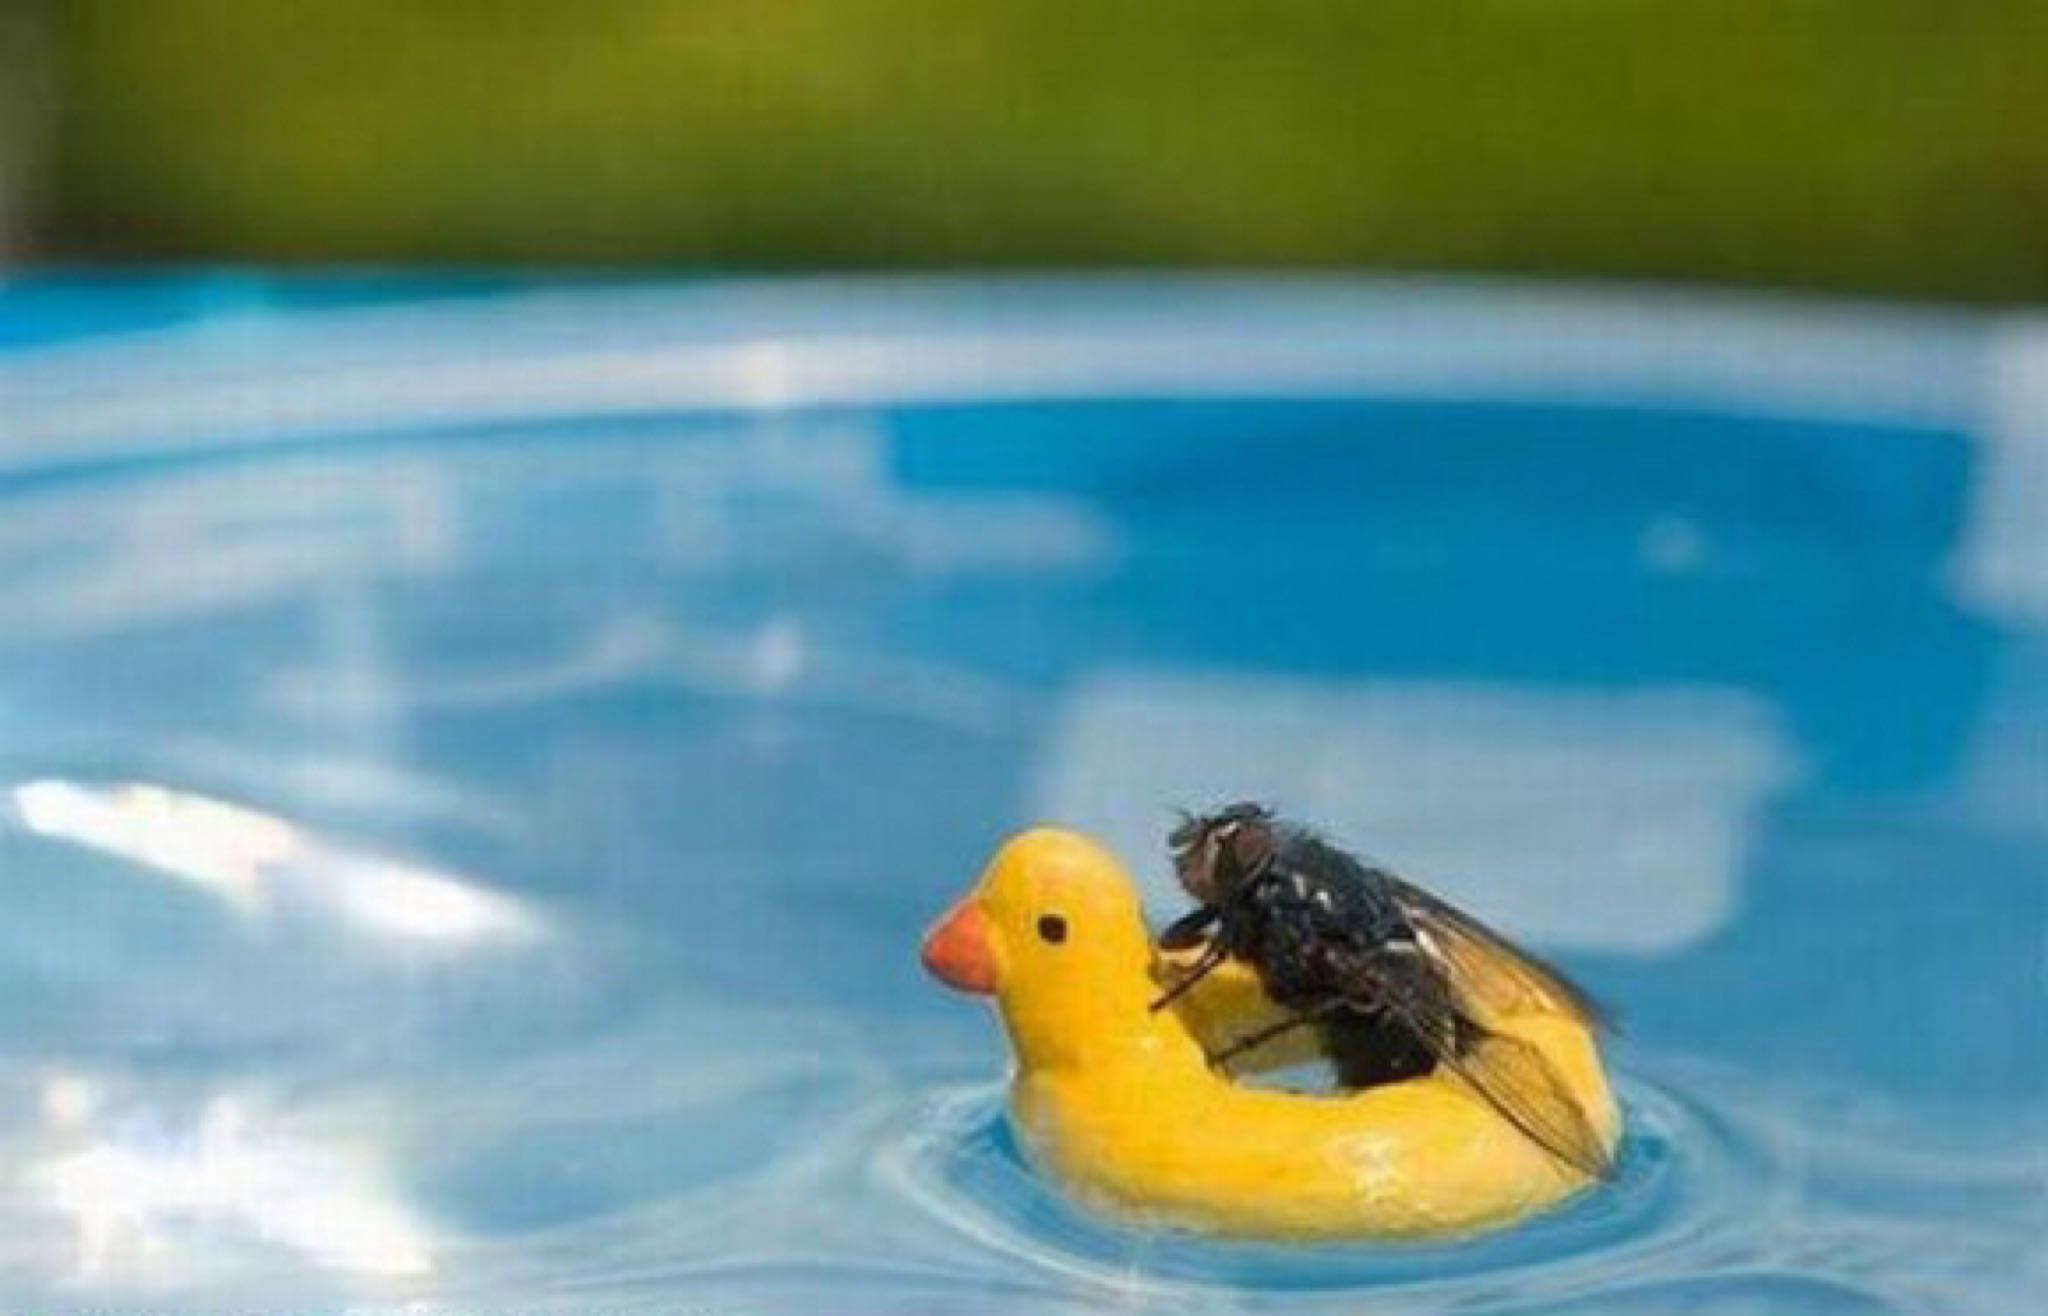 I’ll tolerate a few flies around the pool, but this is ridiculous